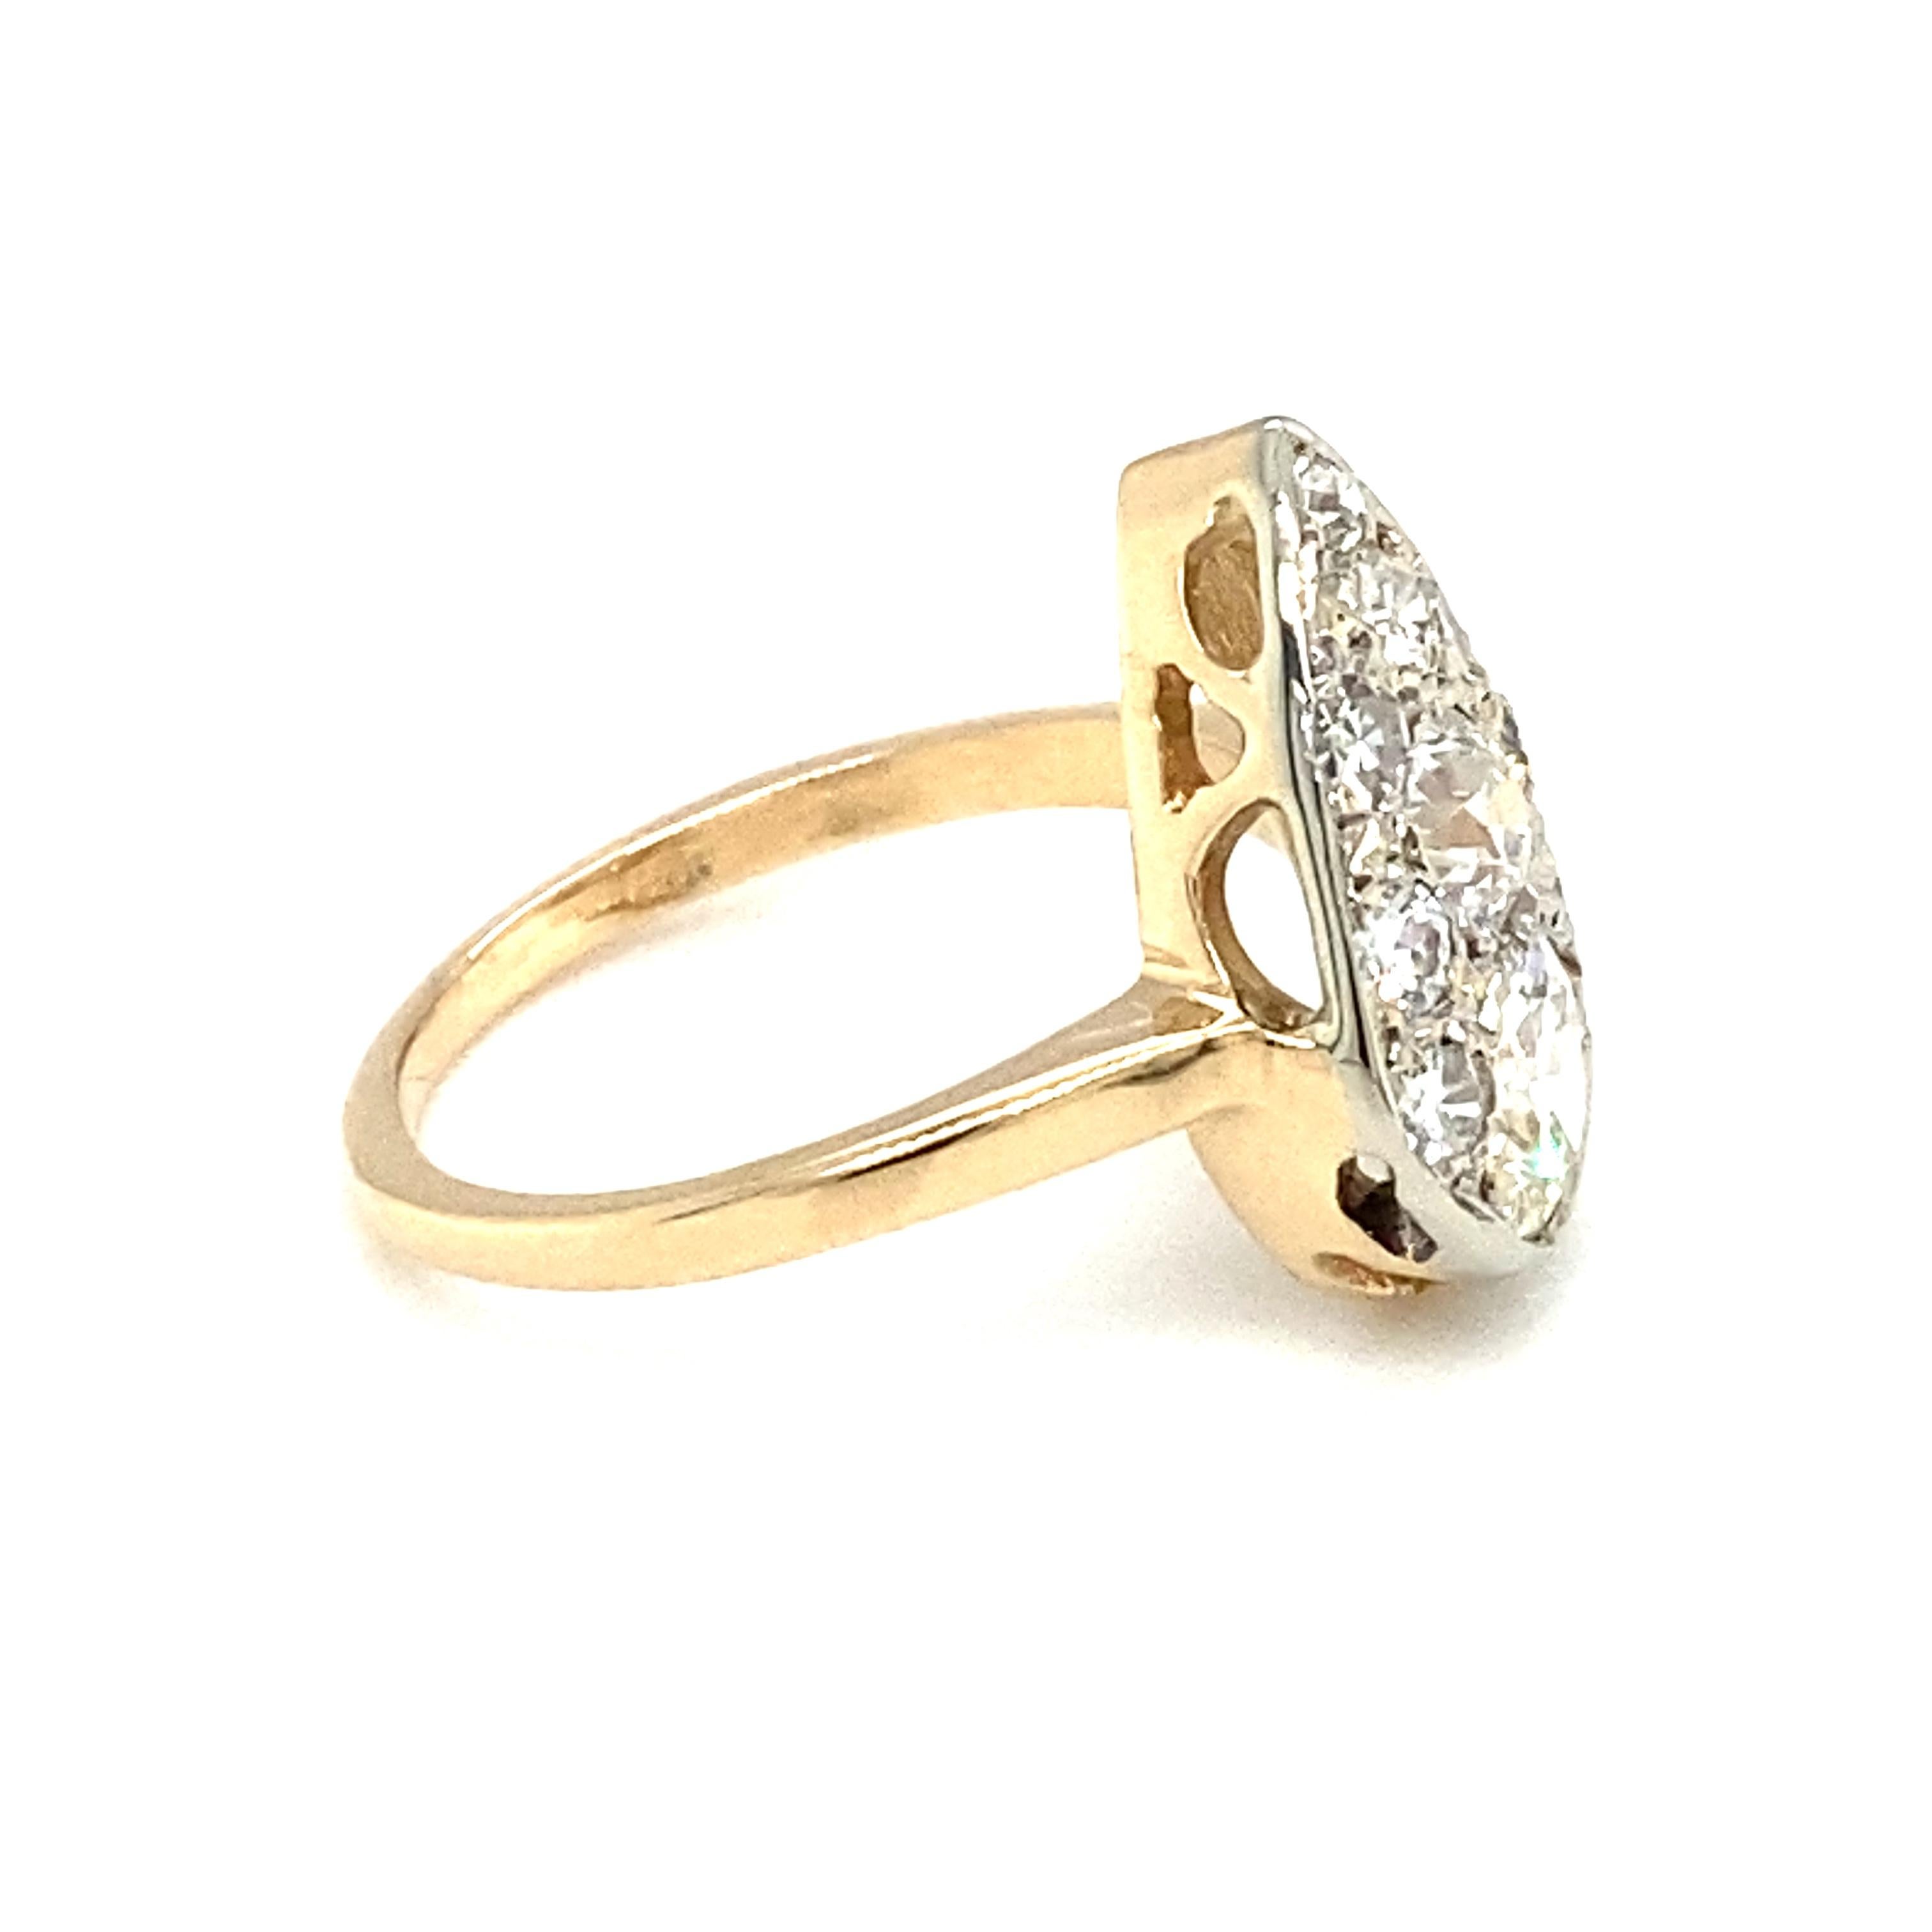 Item Details: This Art Deco ring has a cluster of old European cut diamonds in a pear shape. 
The cluster of diamonds can resemble a 3.0 carat diamond.

Circa: 1920s
Metal Type: 14 Karat Yellow Gold
Weight: 2.8 grams
Size: US 5, resizable

Diamond